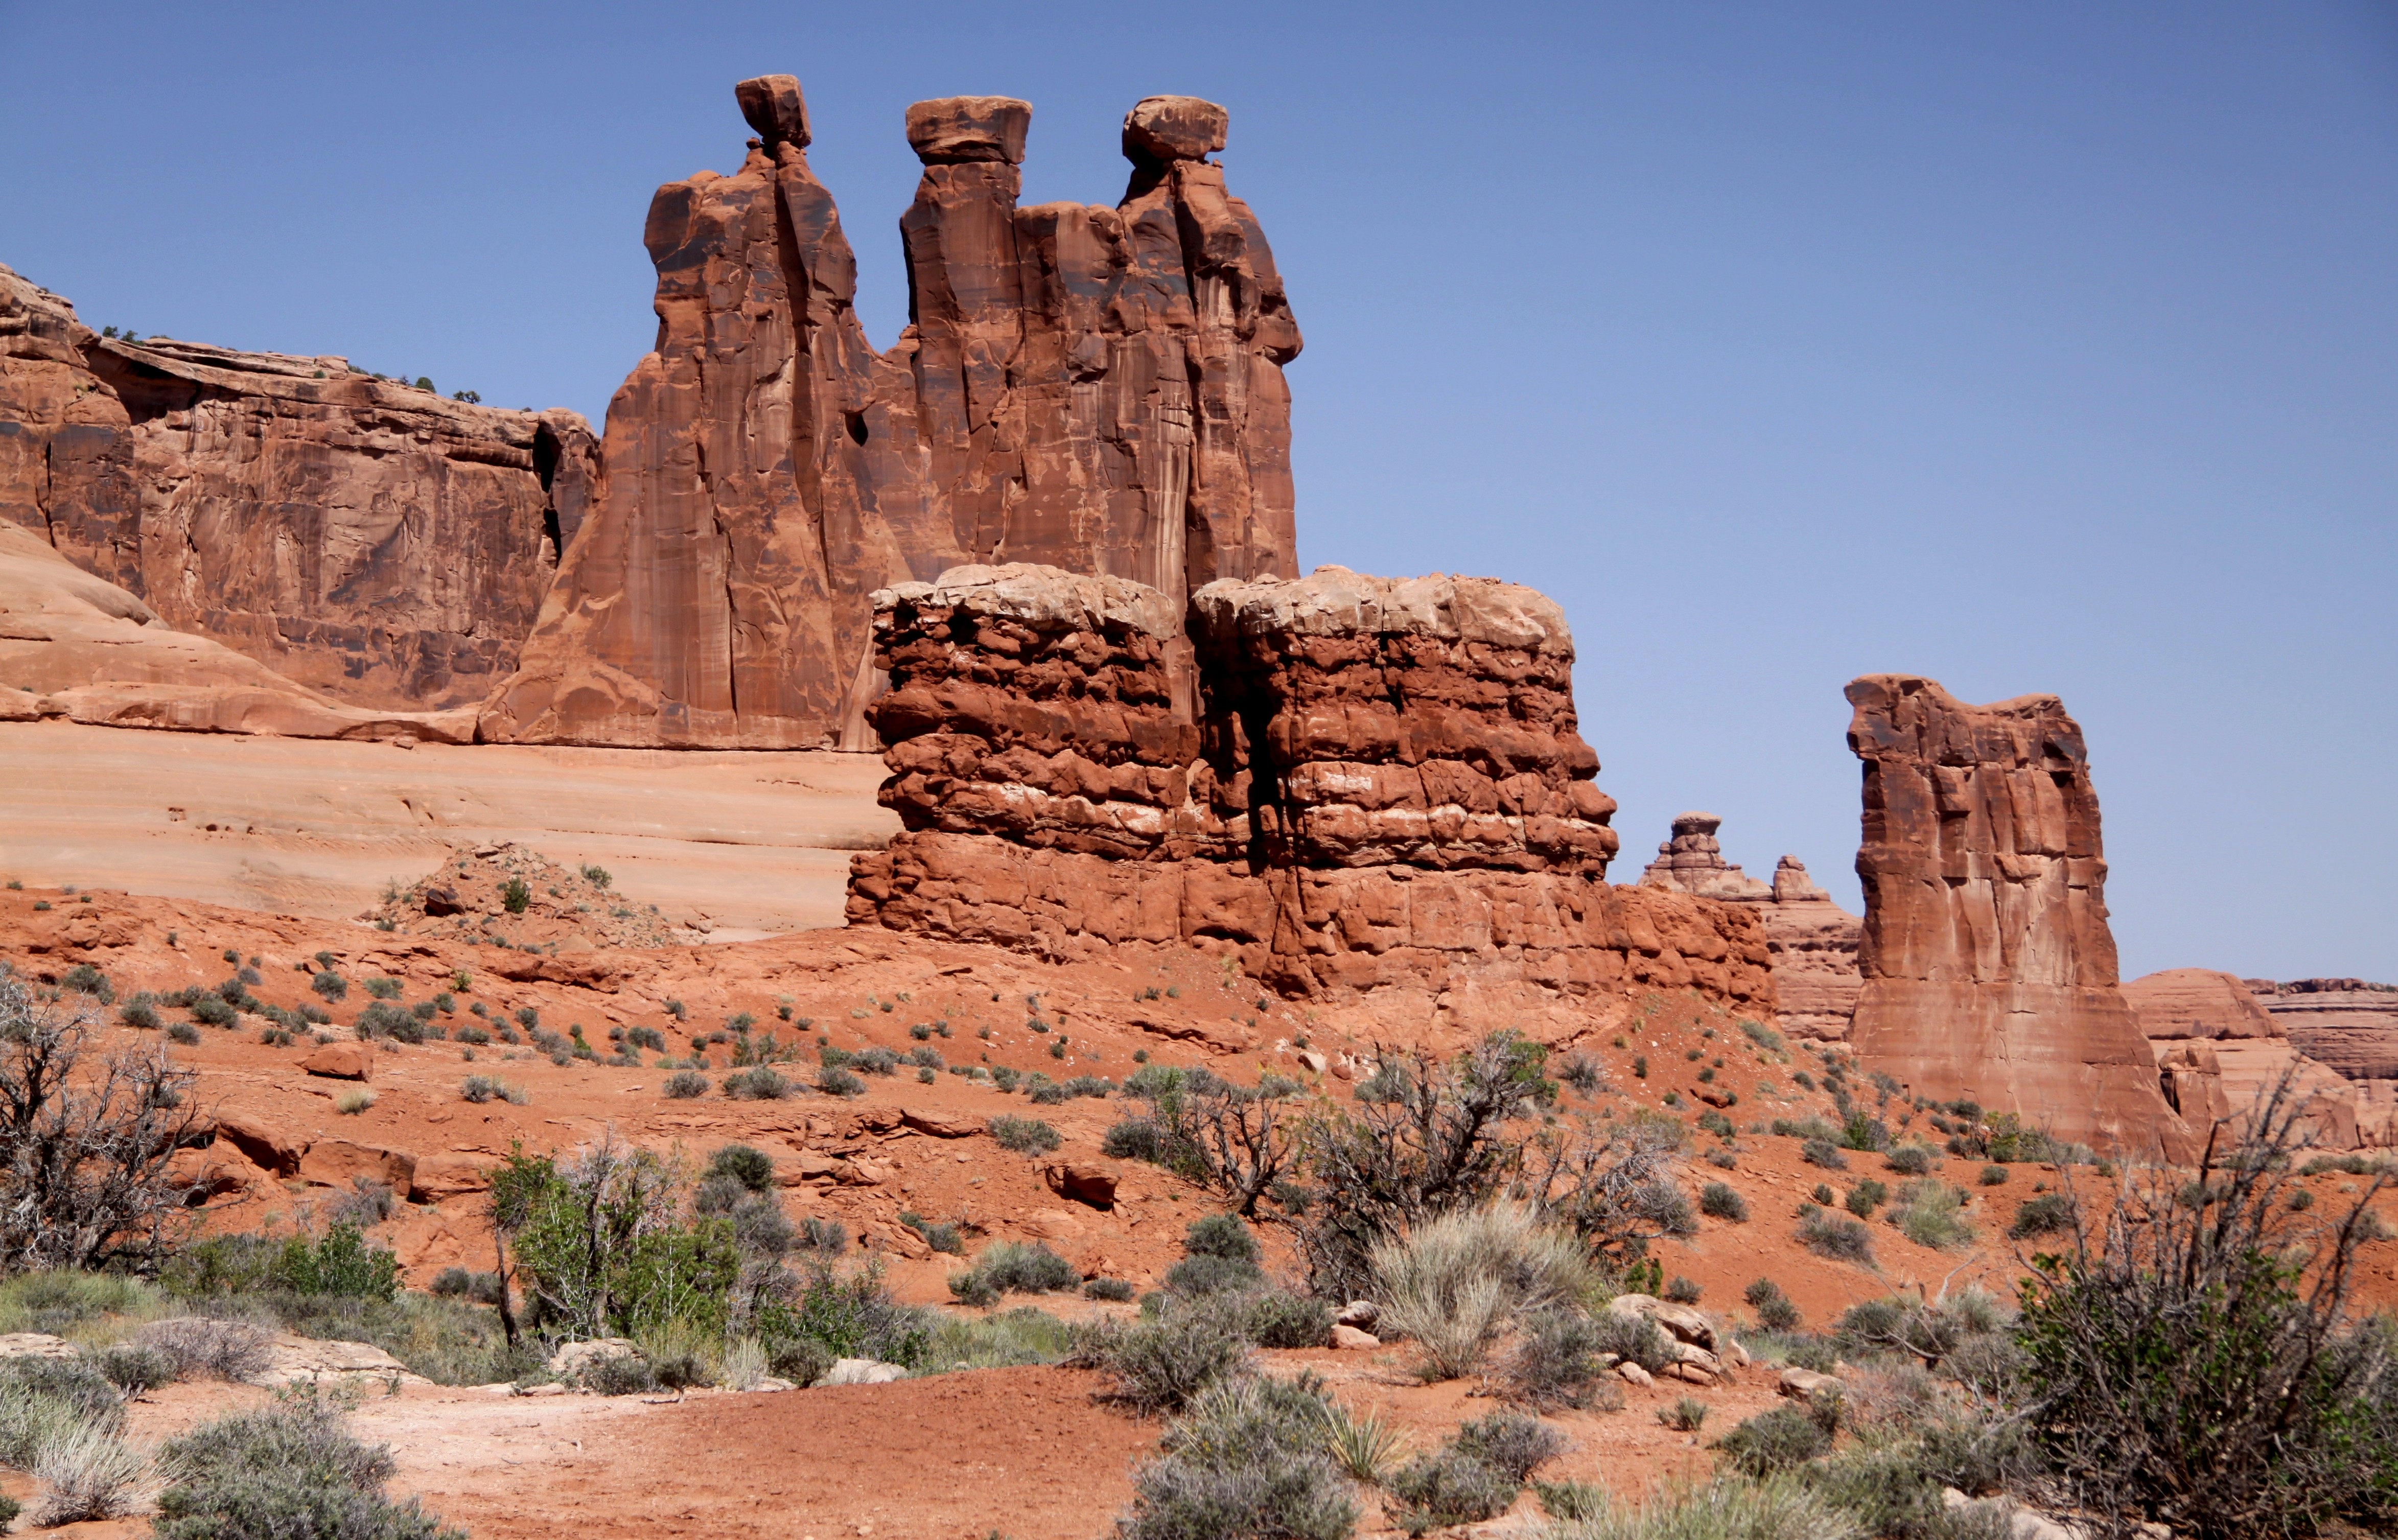 Arches National Park:  The 3 Gossips